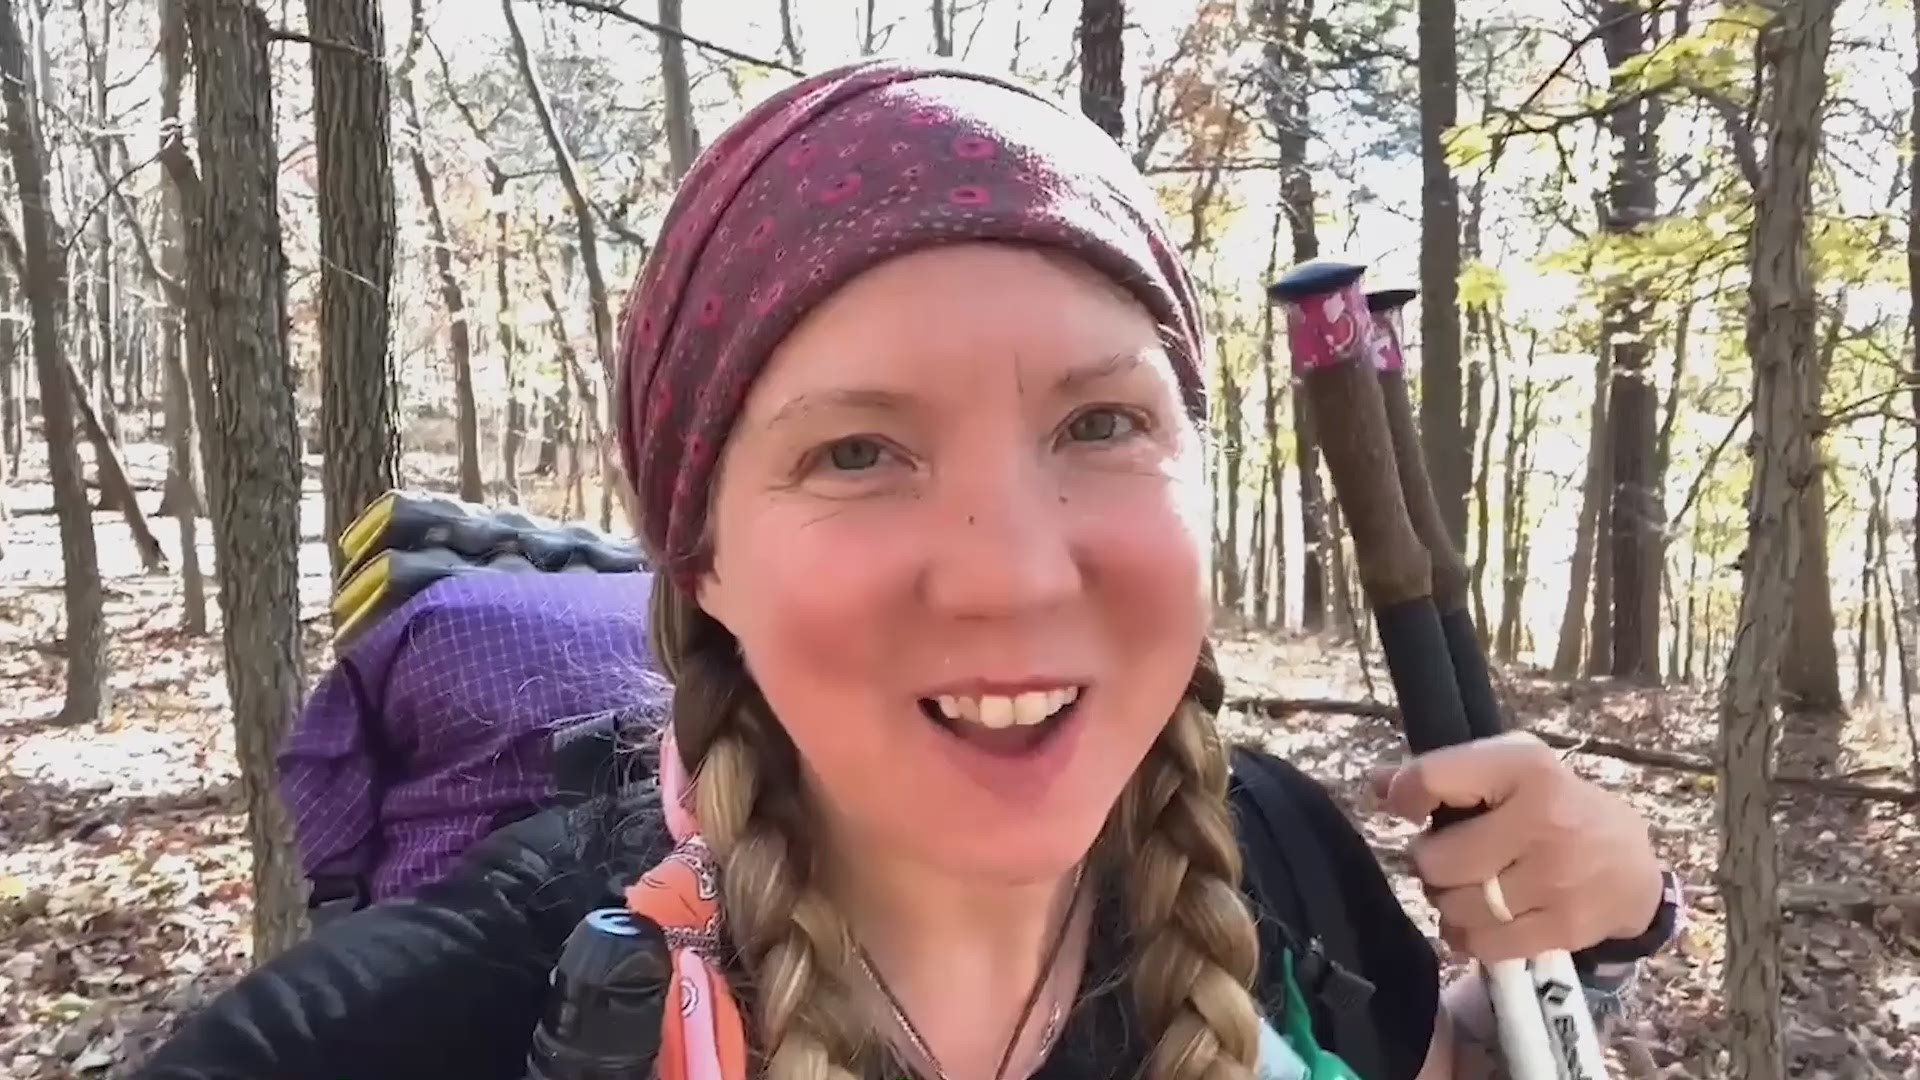 Gretchen and Baby Yoda have less than 500 miles left until they finish their Appalachian Trail thru-hike.